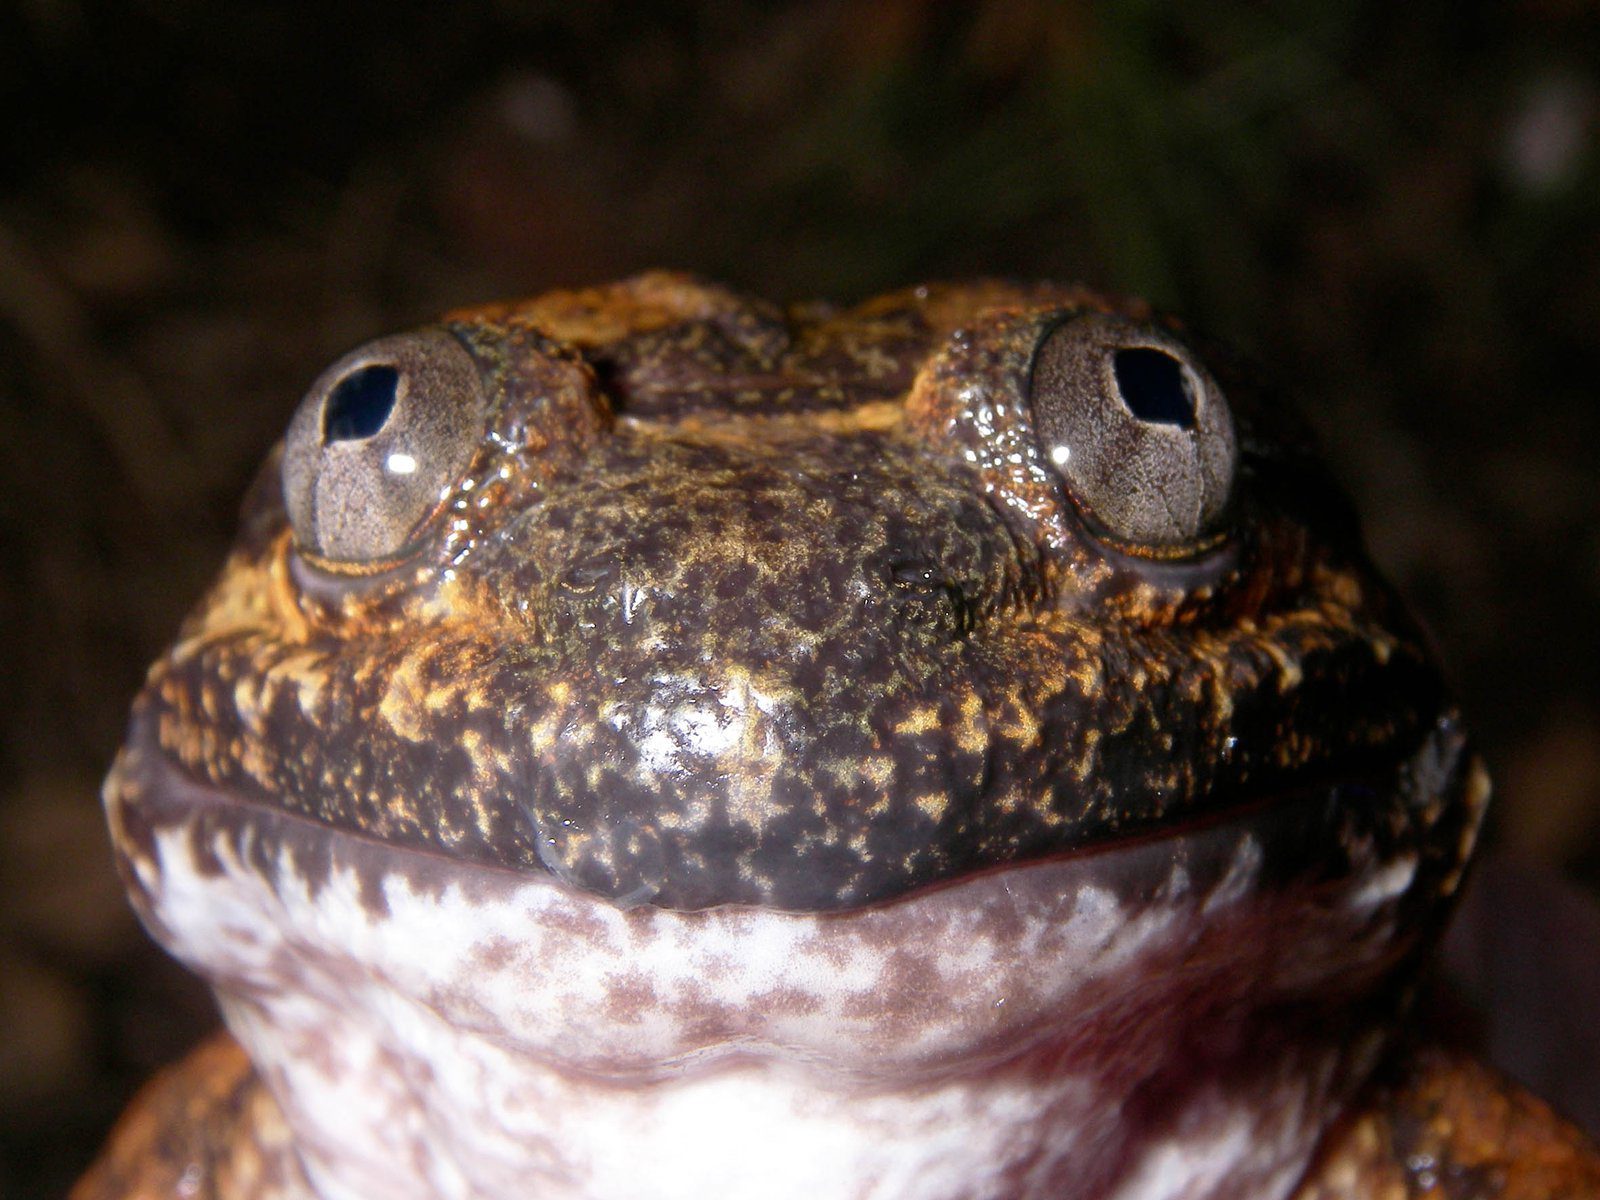 New Fanged Frog Species Discovered In Cambodia ⋆ Cambodia News English